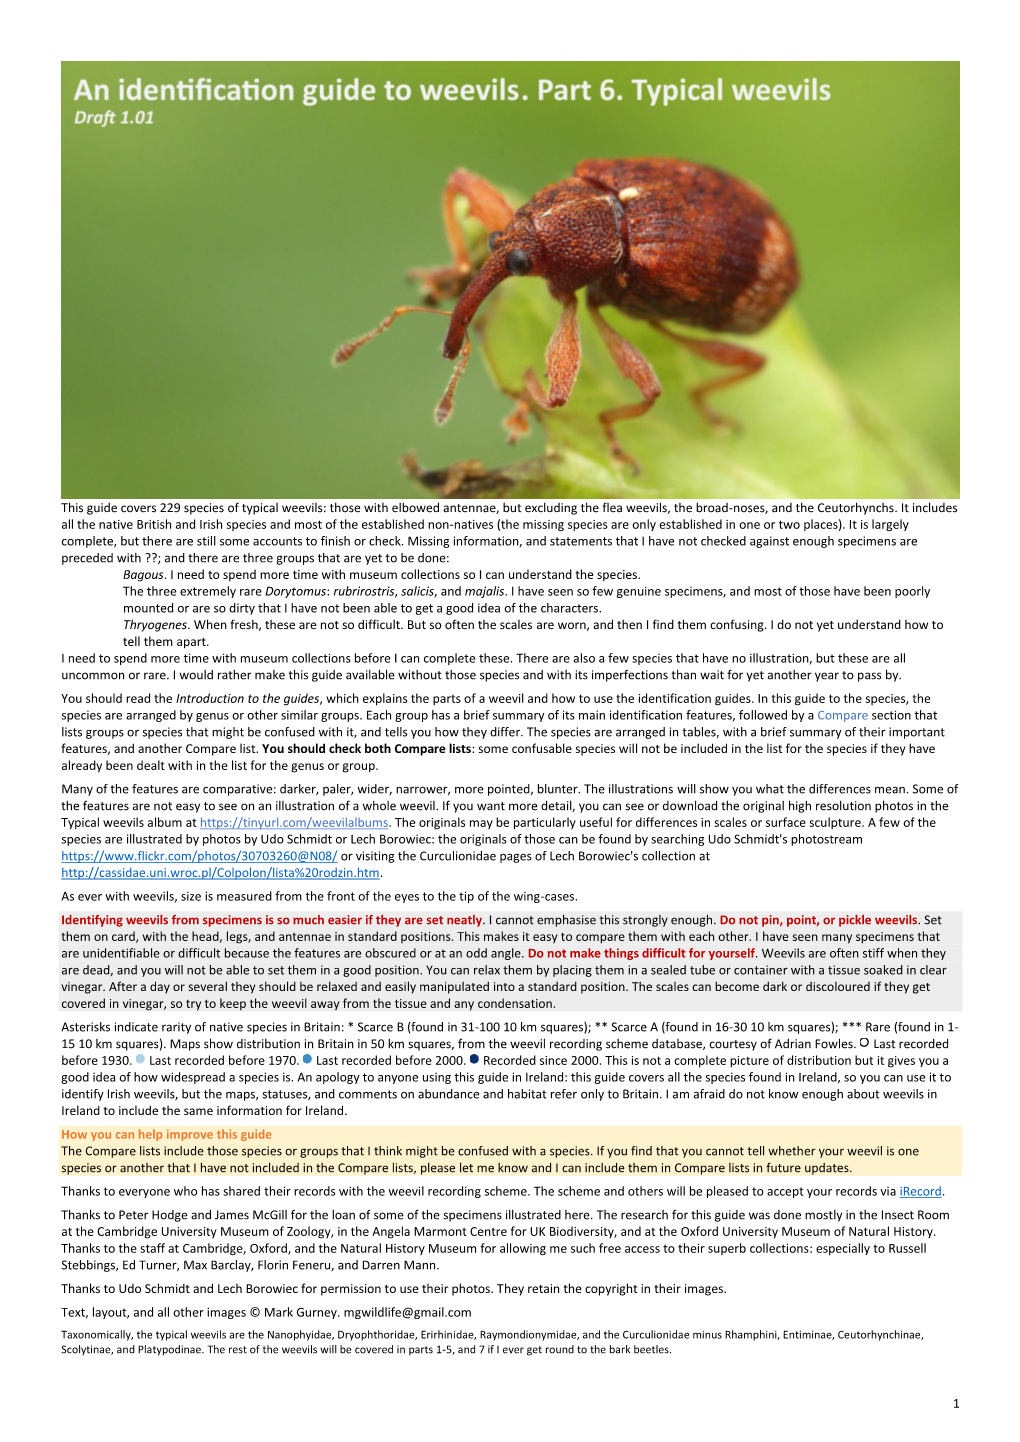 1 This Guide Covers 229 Species of Typical Weevils